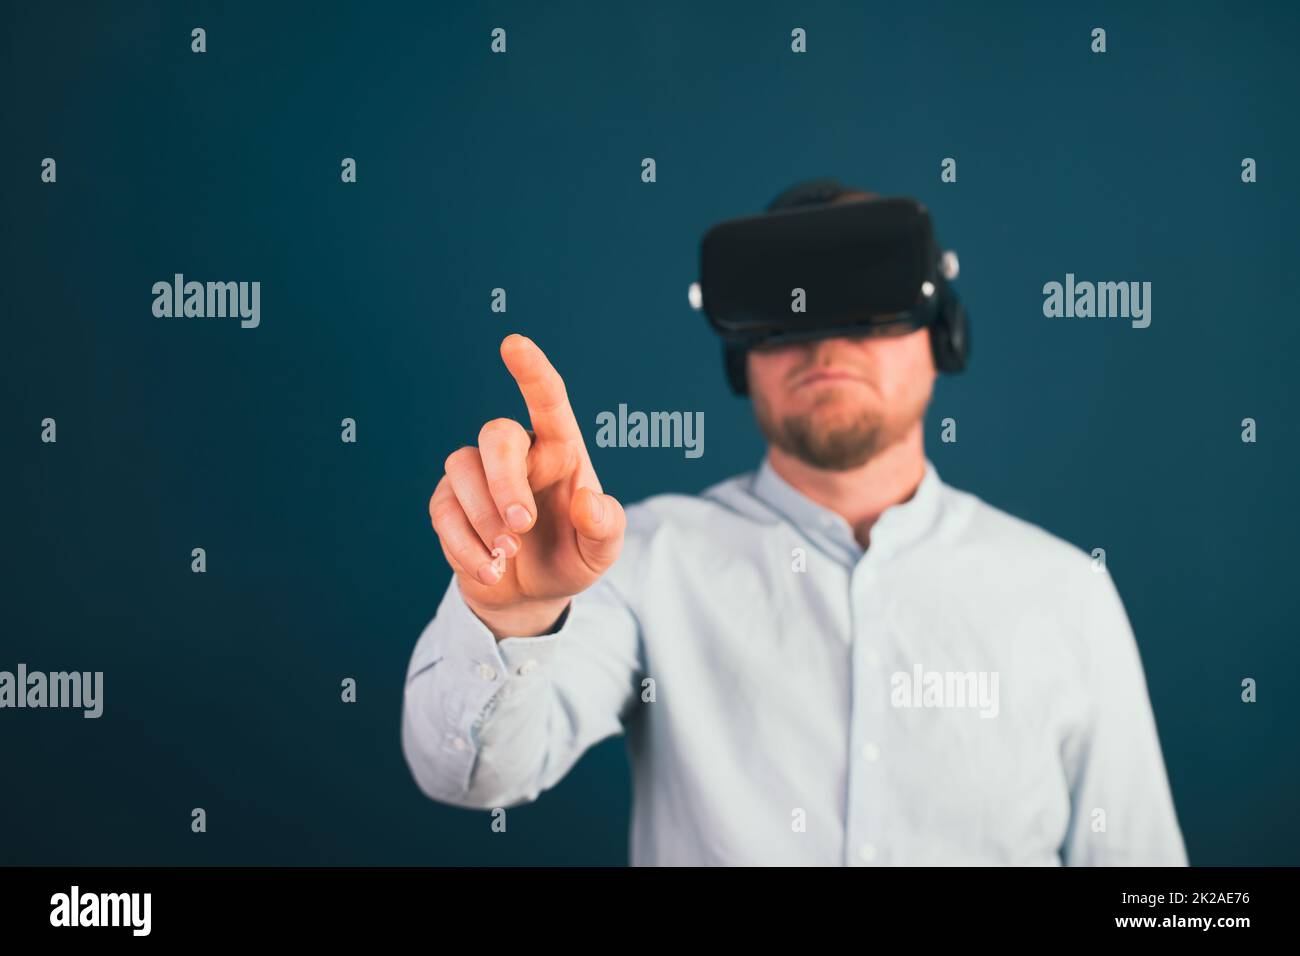 Metaverse Technology concept. Virtual augmented reality on social network. Stock Photo